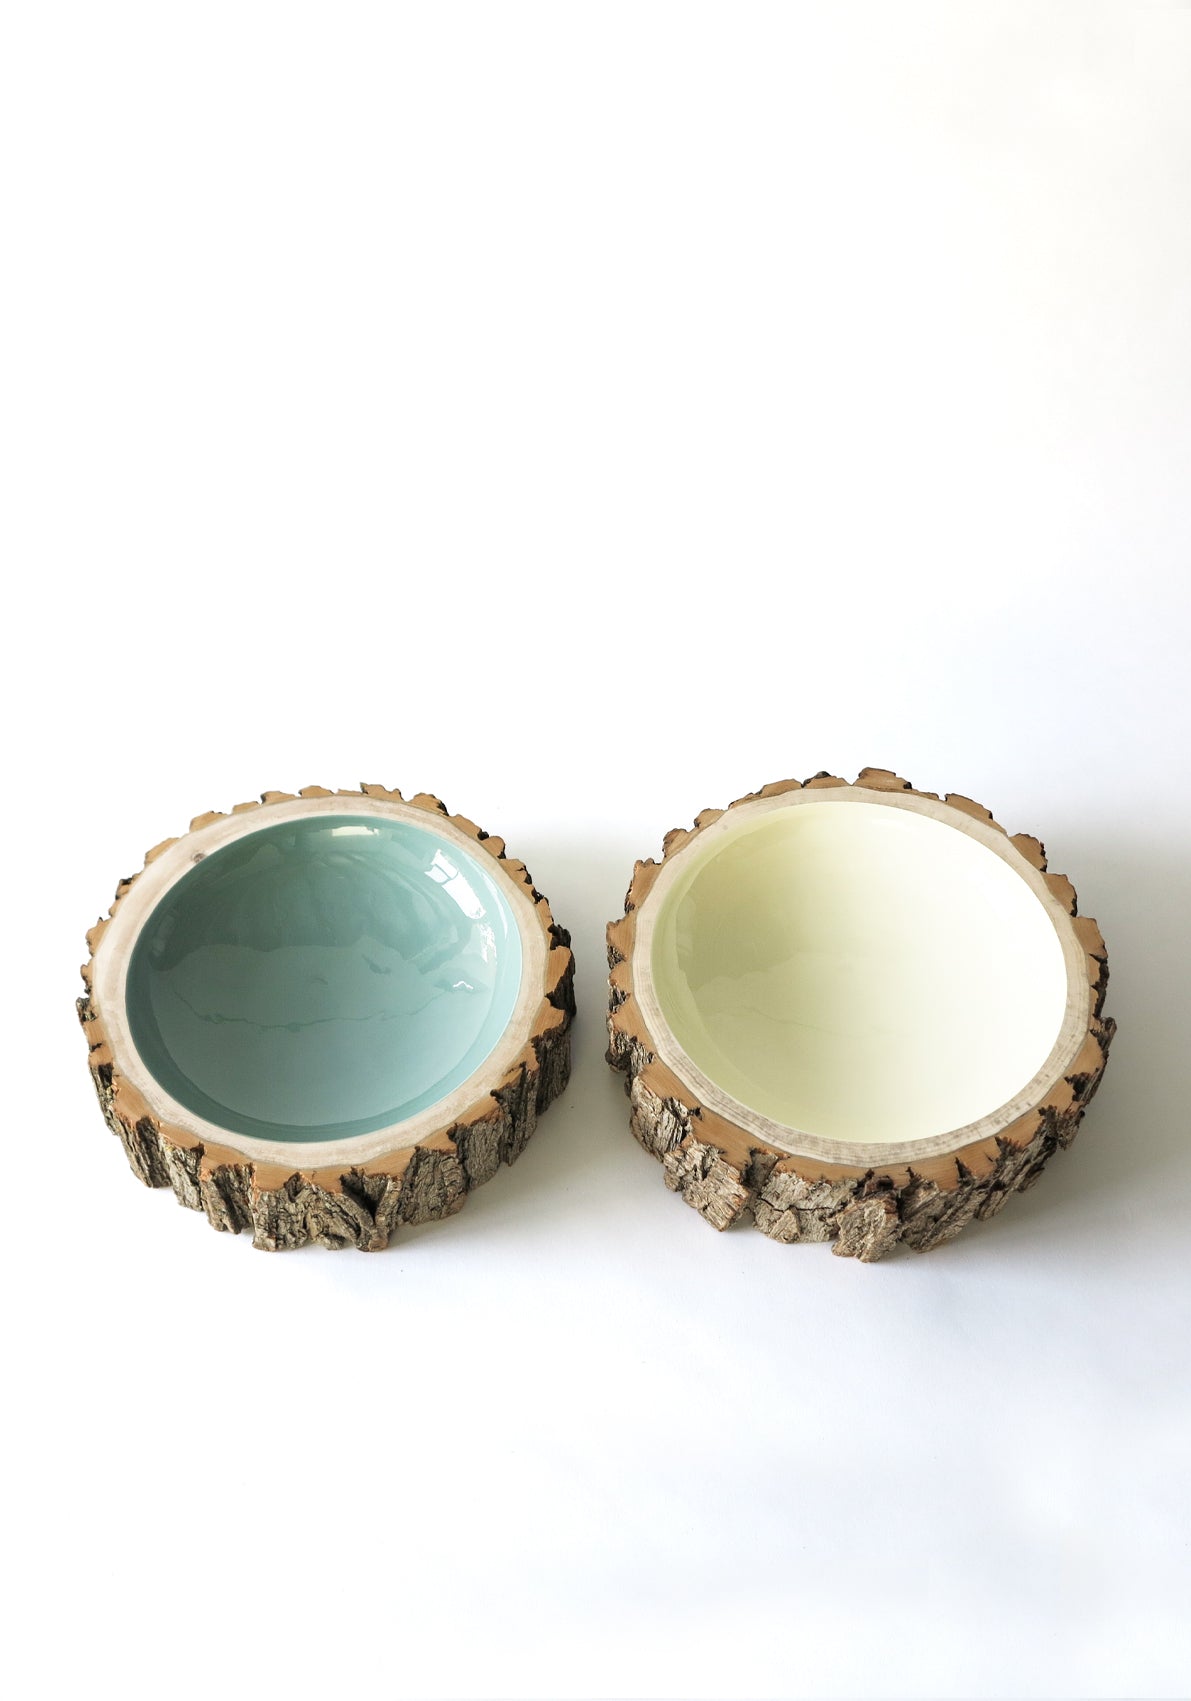 Size 11 Log Bowl - Two Extra Large Wooden Bowl with rough bark, glossy interiors are a pale green/blue sage and an off white creme.